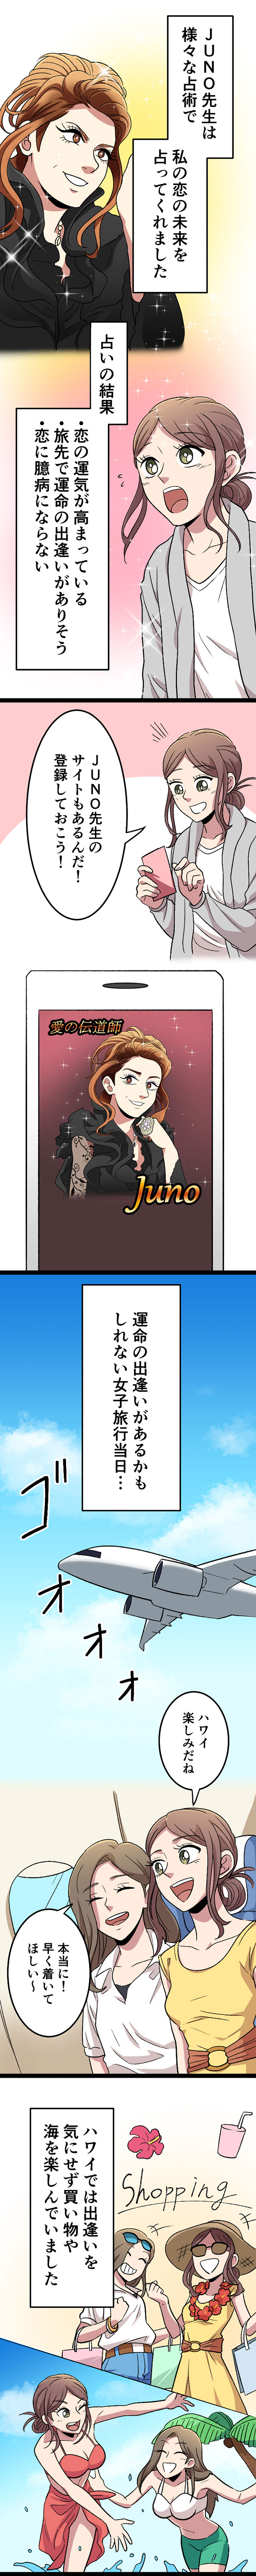 JUNO_占い漫画